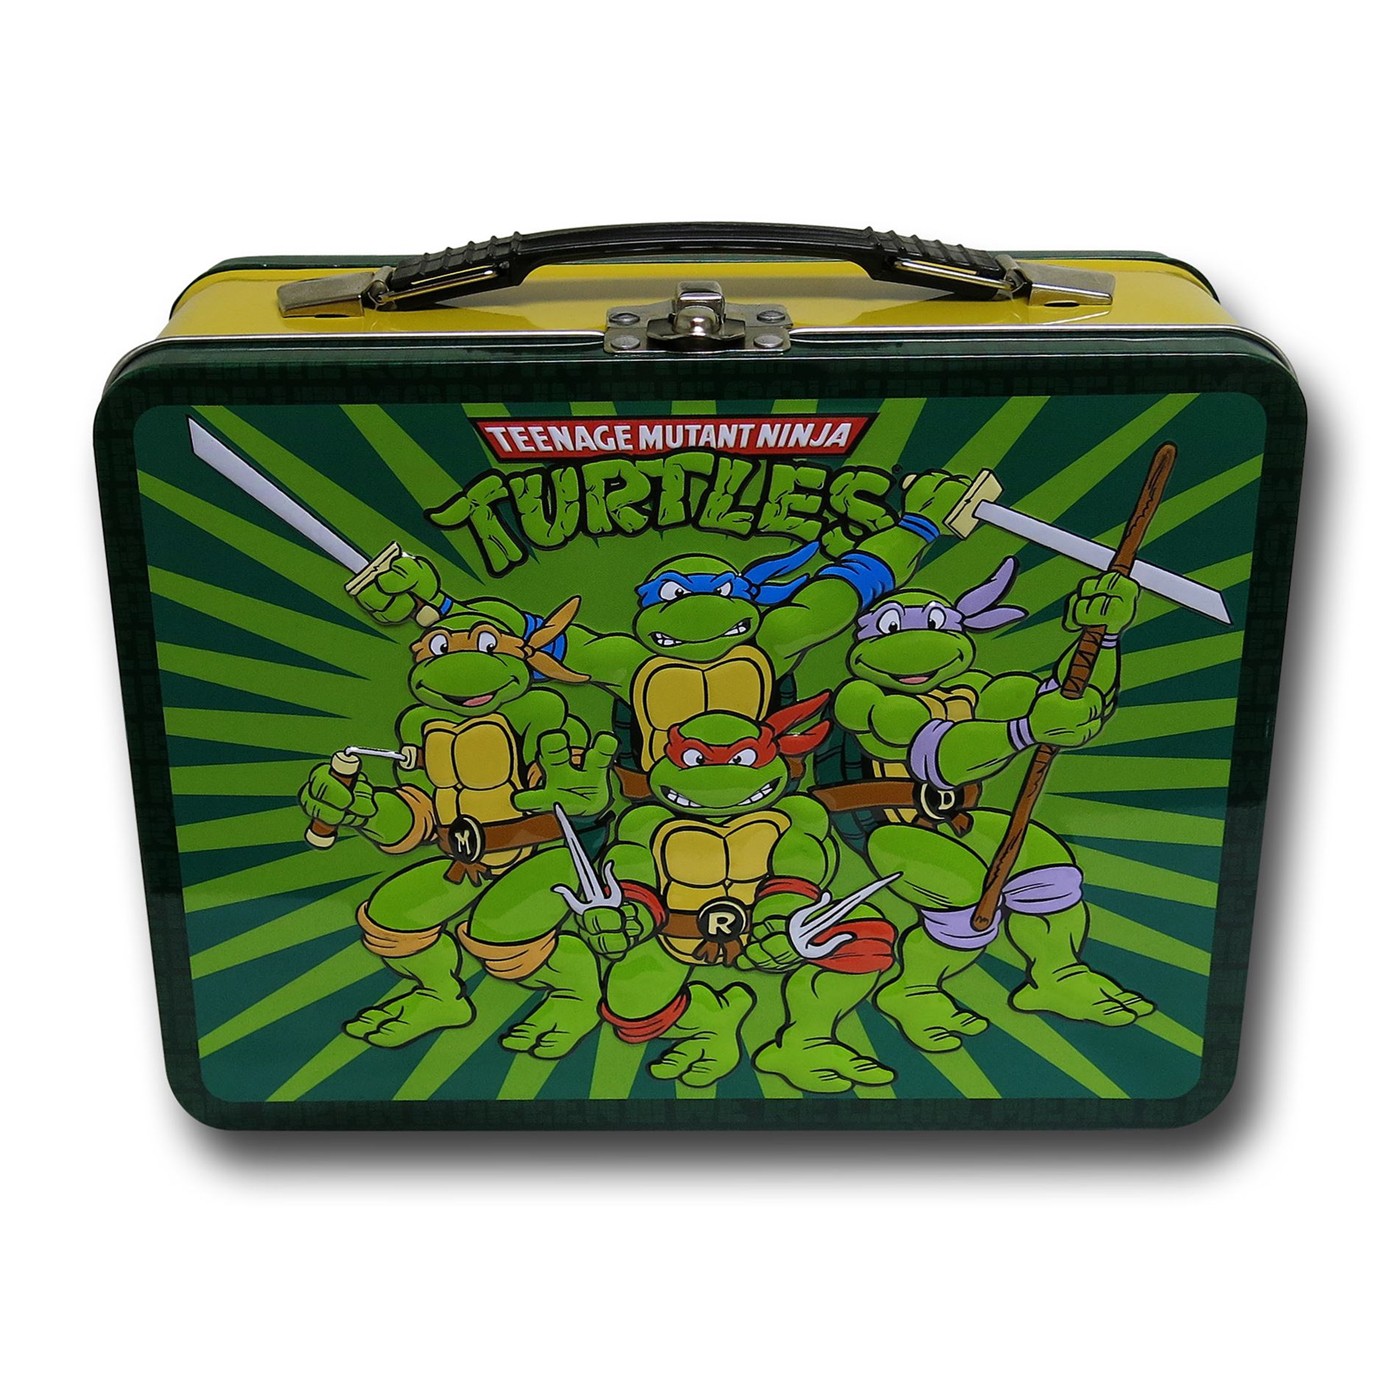 TMNT Fearsome Foursome Tin Lunch Box